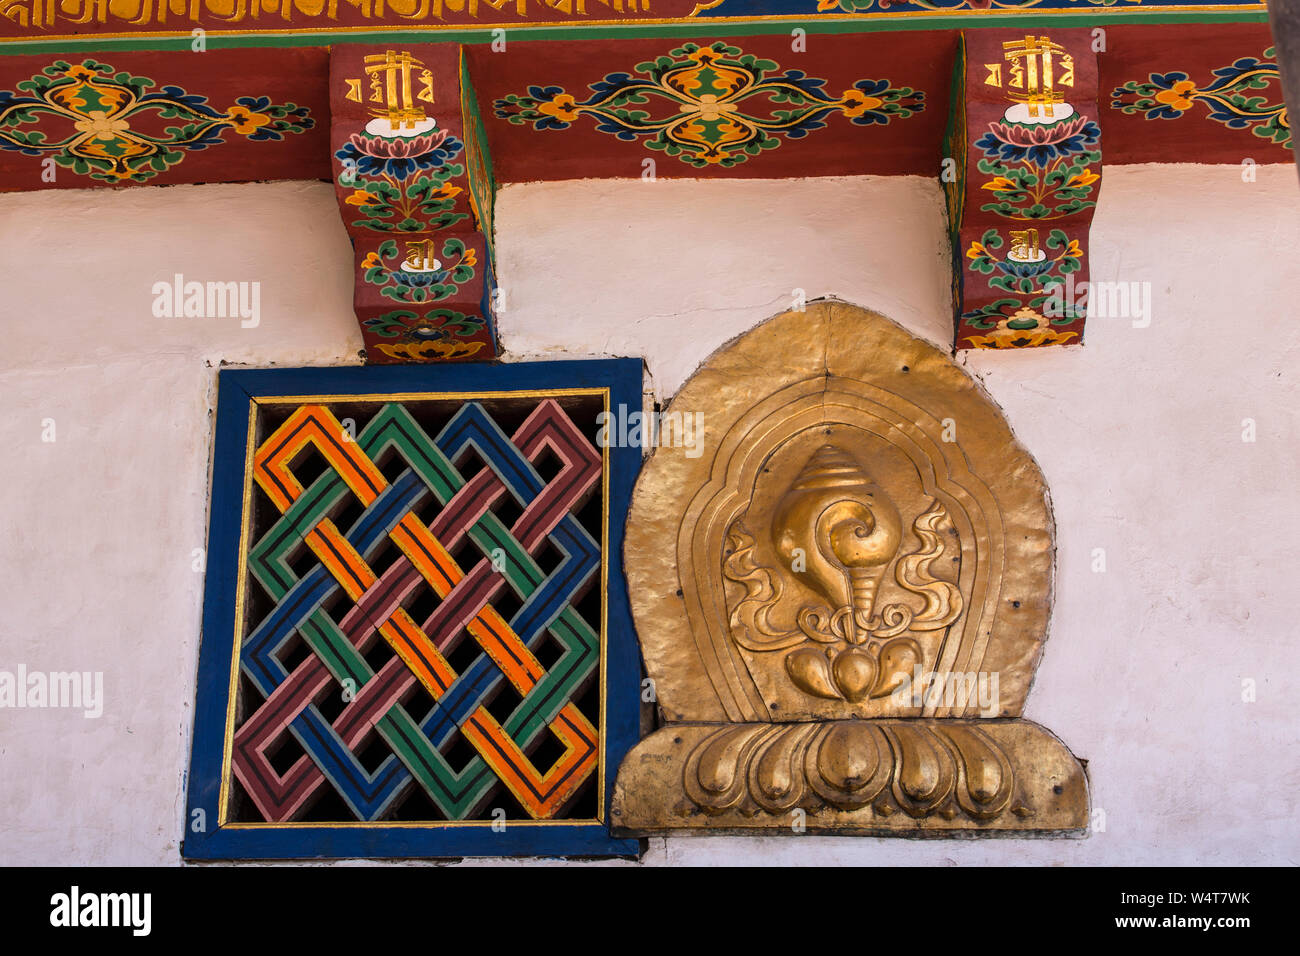 China, Tibet, Lhasa, Architectural detail of a window painted as an Endless Knot and a gilded conch shell at the Jokhang Buddhist temple  which  founded about 1652 AD  It is the most sacred Buddhist temple in Tibet and is a part of the Historic Ensemble of a UNESCO World Heritage Site. Stock Photo